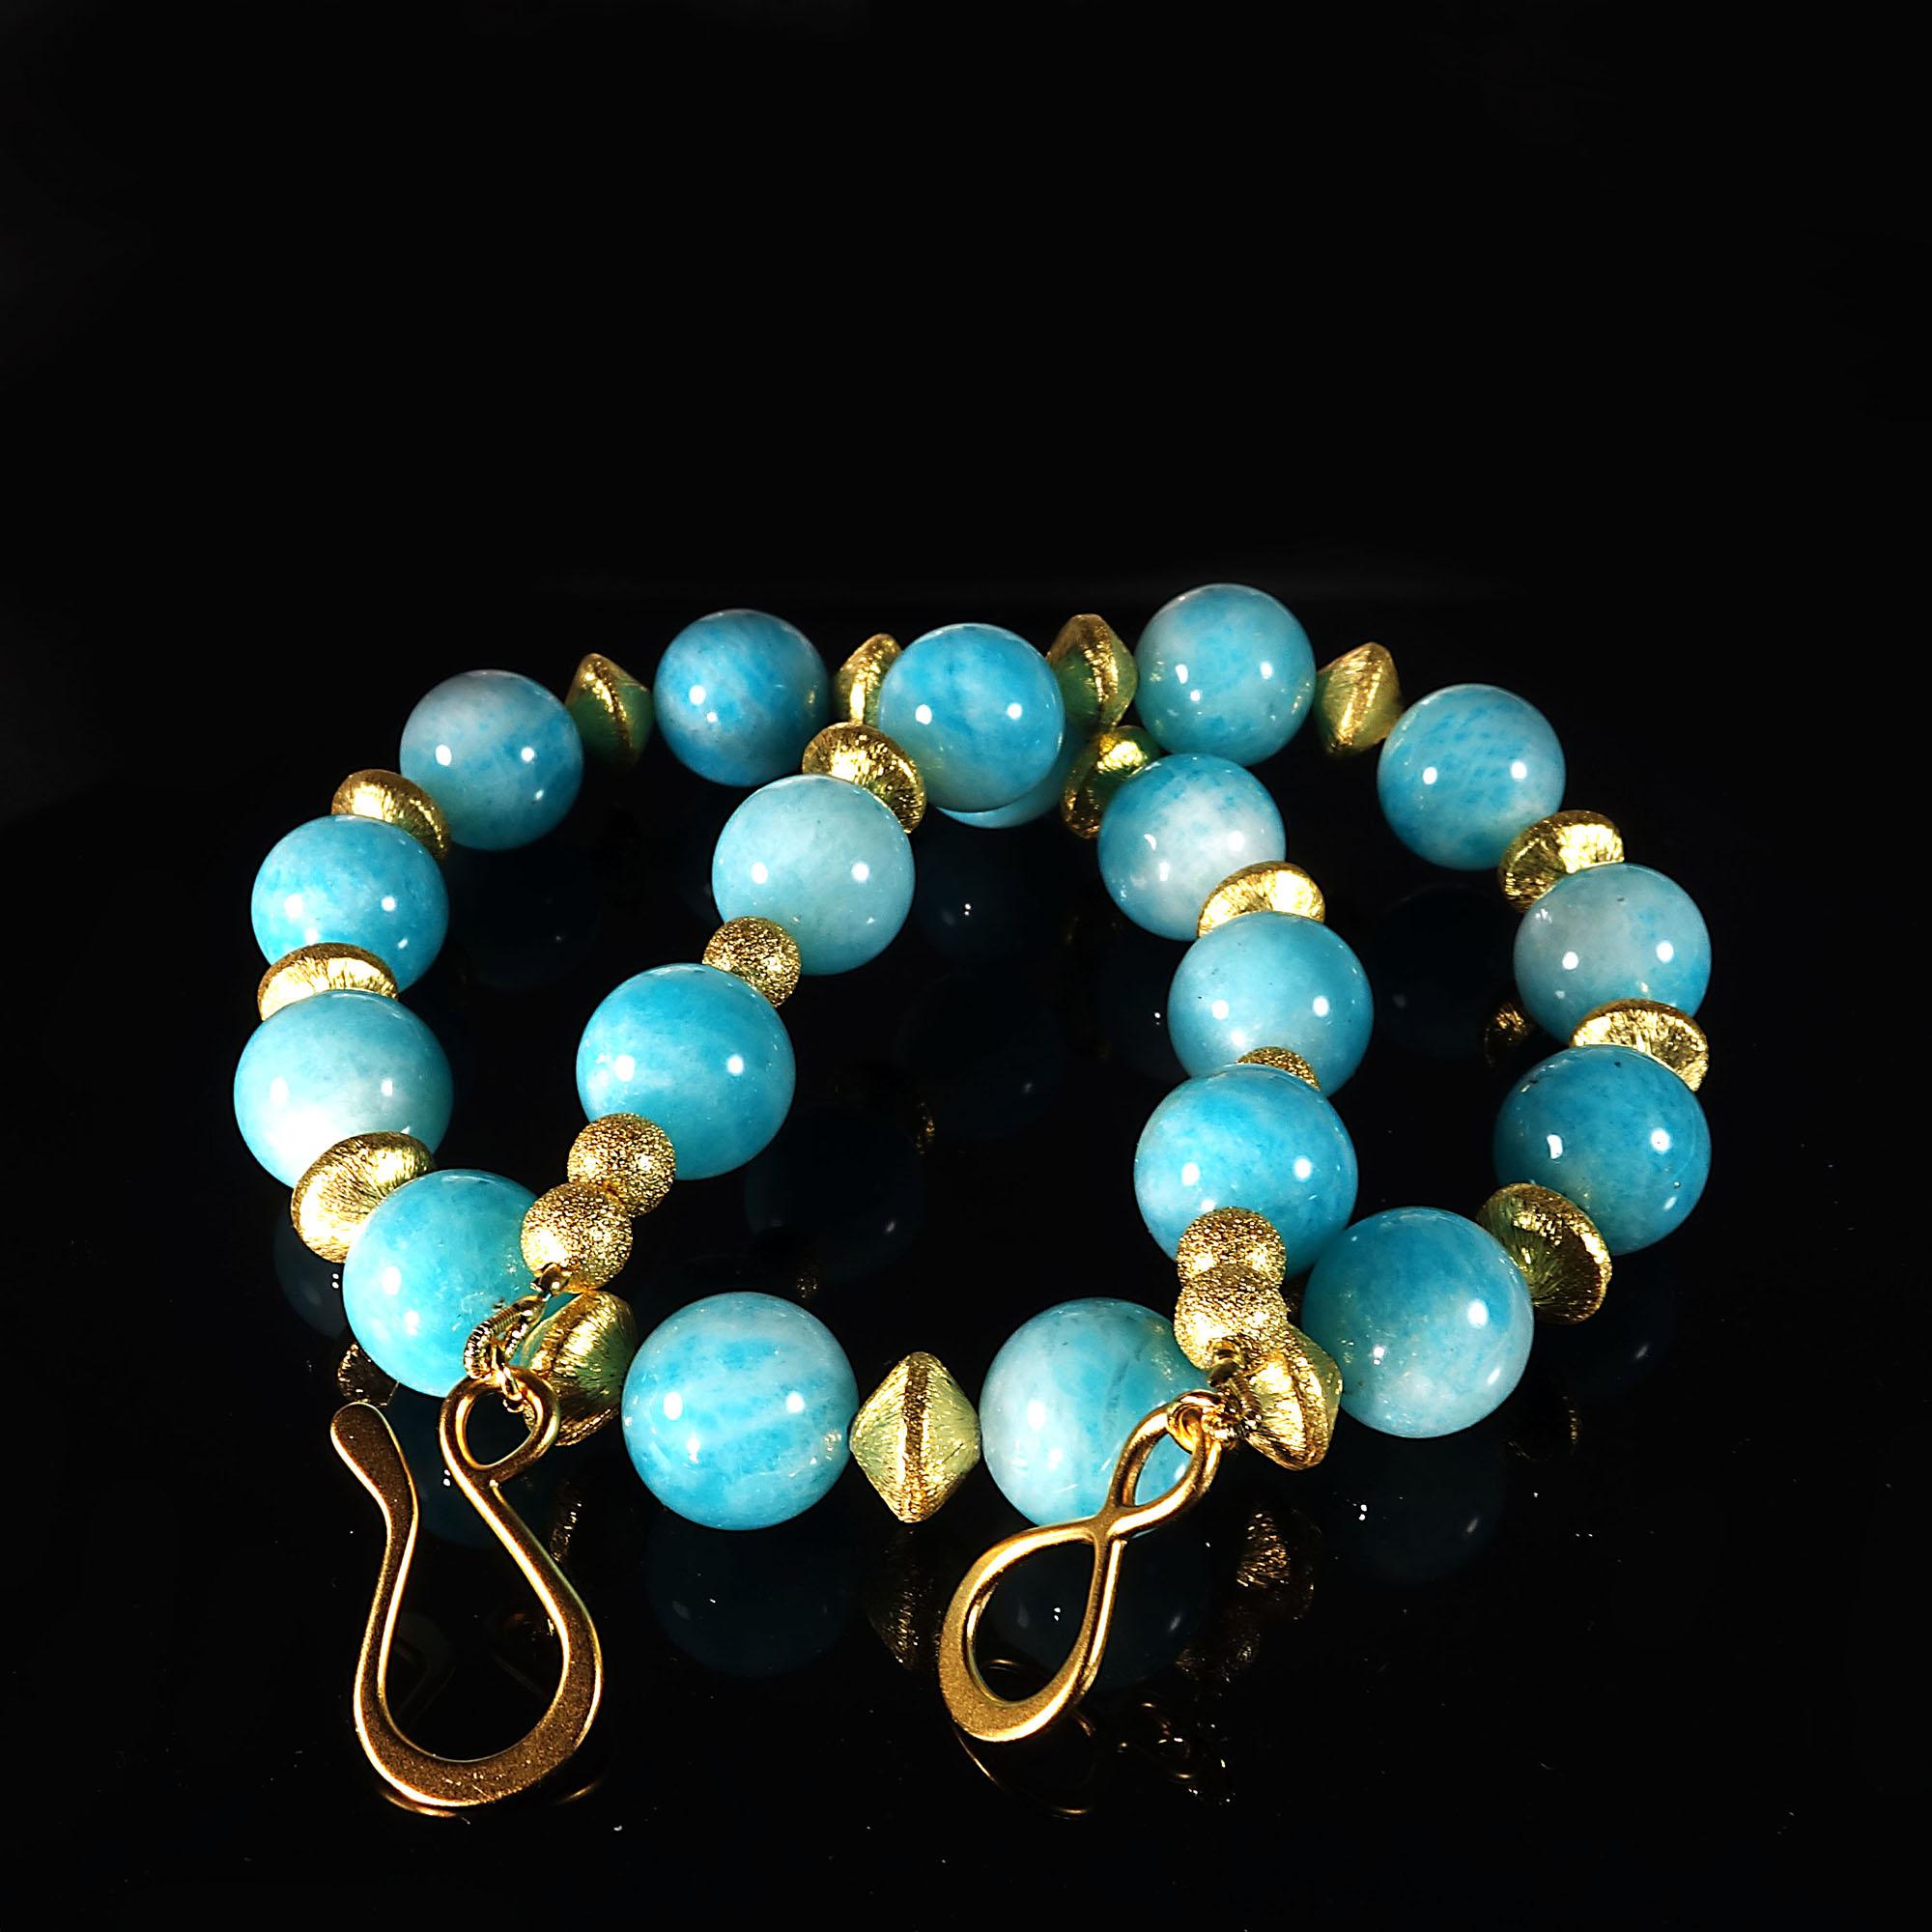 Artisan Gemjunky Choker Necklace of Glowing Amazonite with Gold Tone Accents